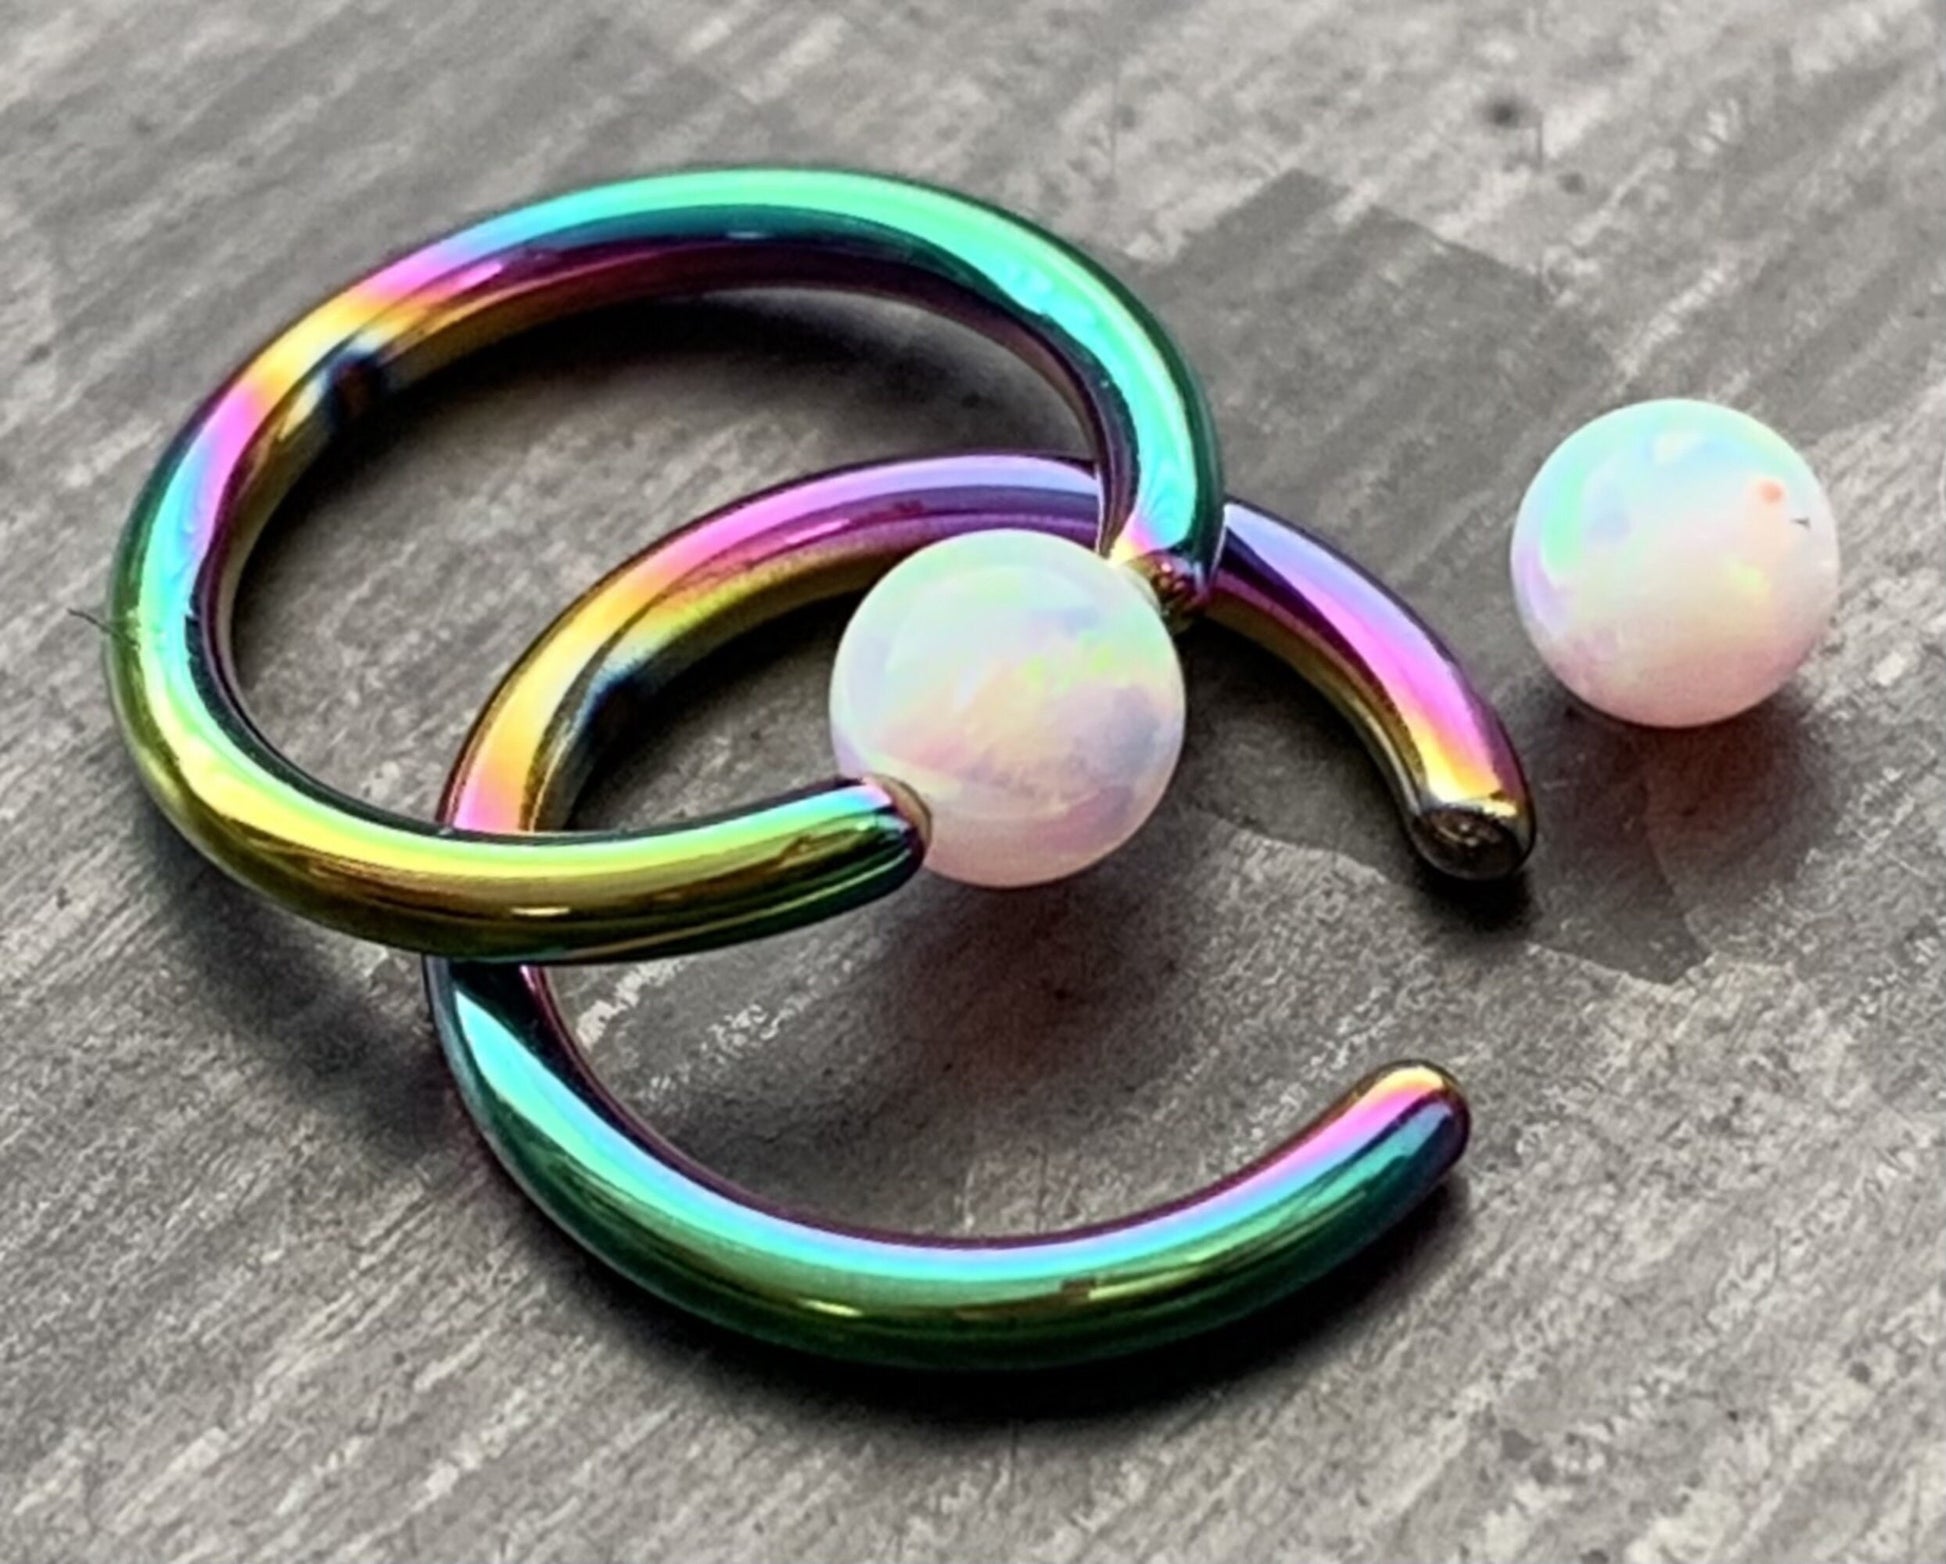 PAIR of Beautiful Synthetic Opal Ball Ion Plated Captive Bead Rings - 16g - 5/16" (8mm) - Black, Gold, Rose Gold and Rainbow Available!